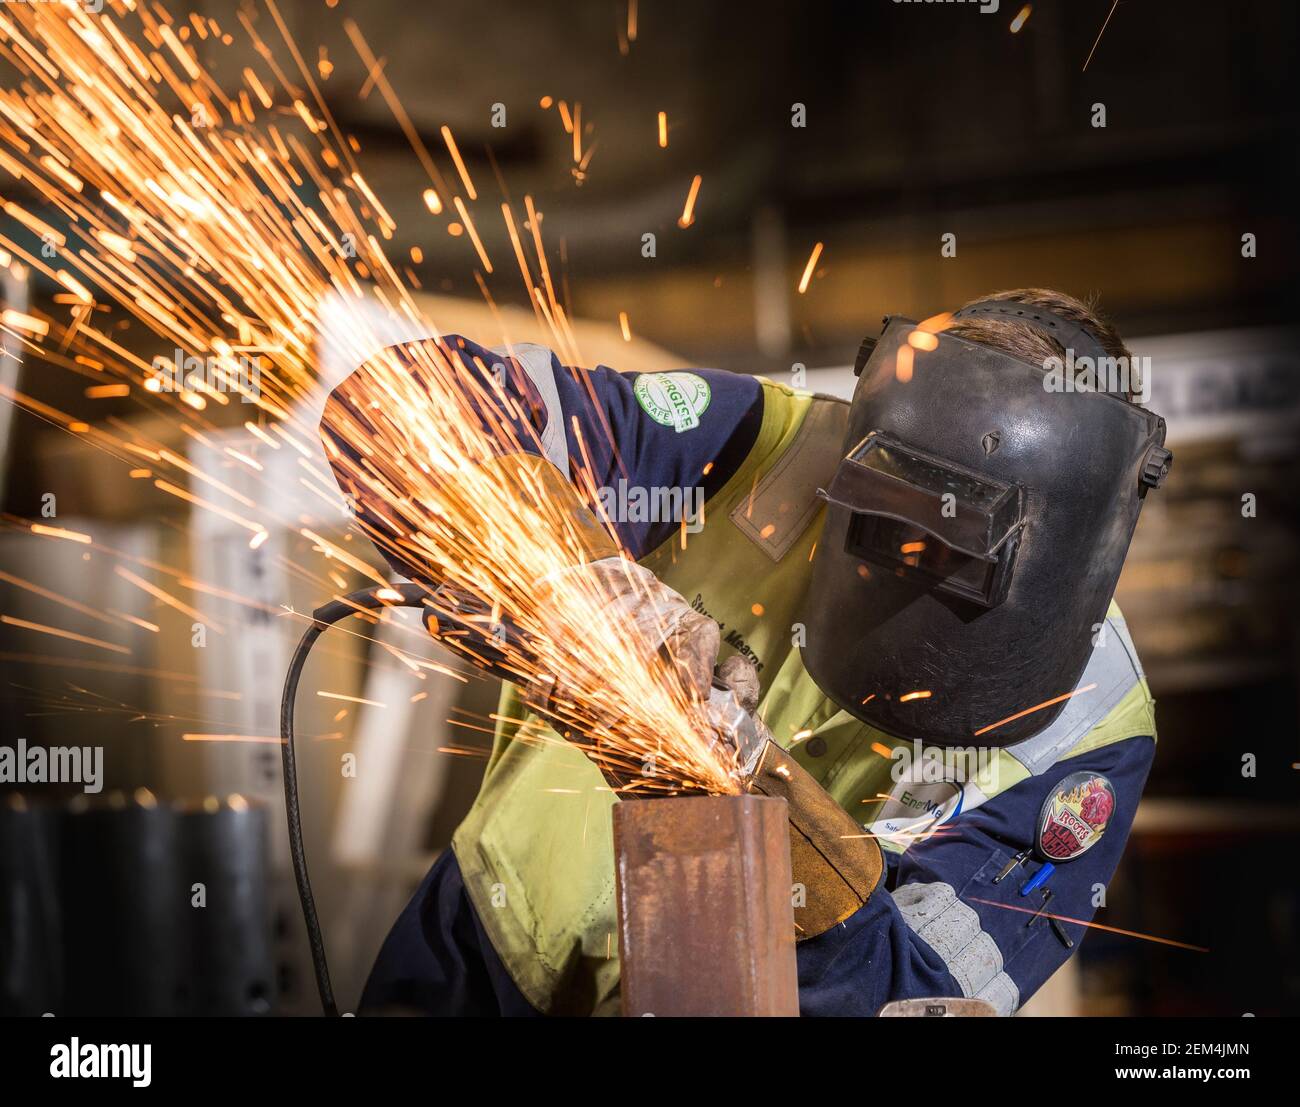 A worker wearing gauntlets and a mask using a grinder on a piece of metal Stock Photo